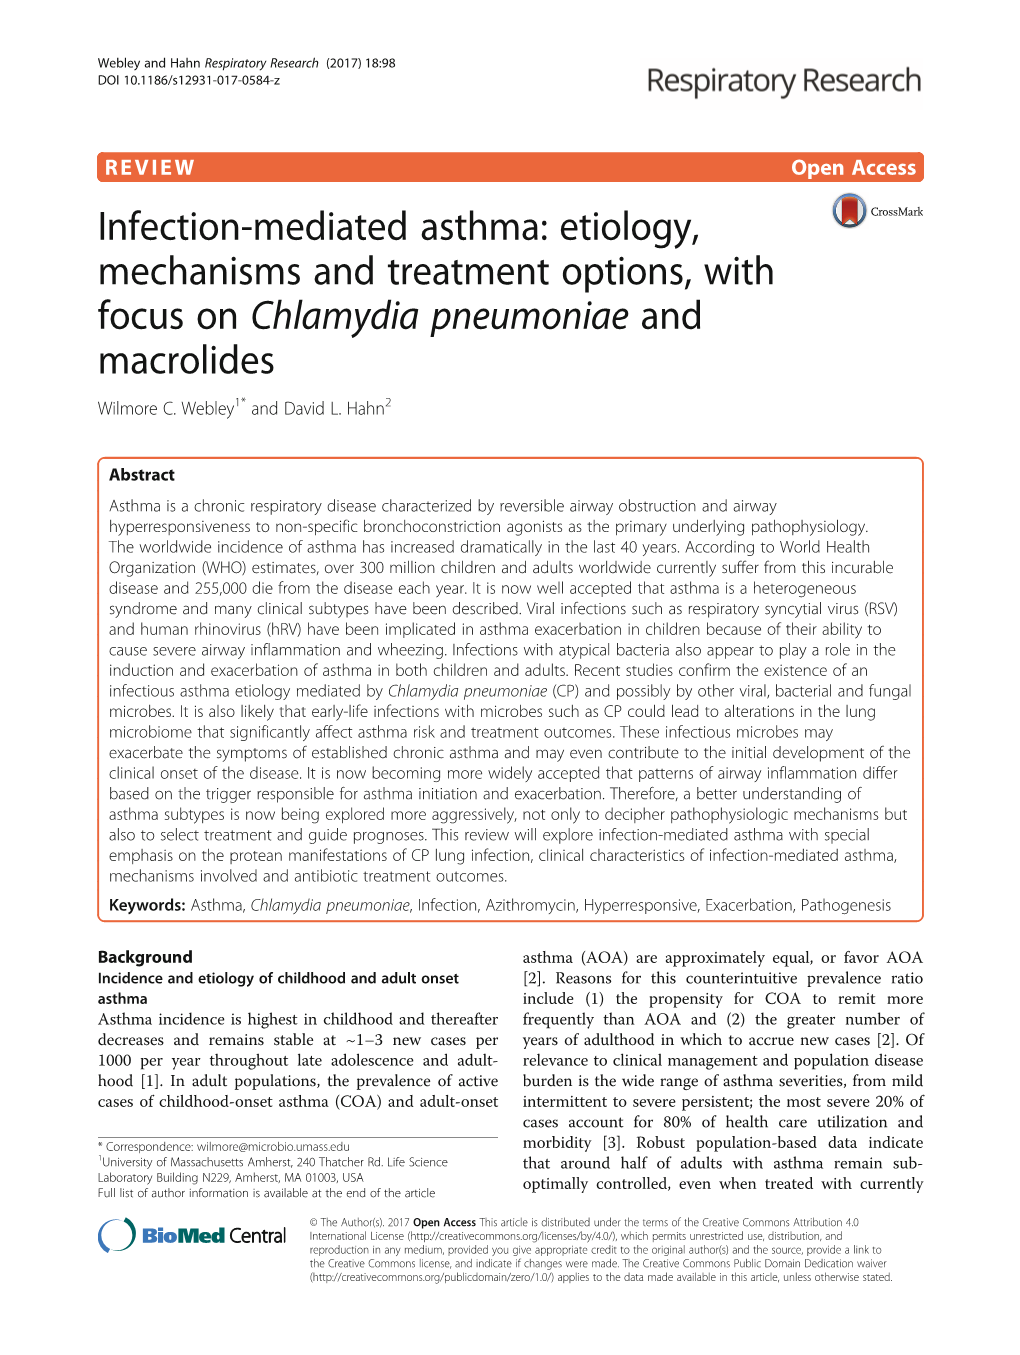 Infection-Mediated Asthma: Etiology, Mechanisms and Treatment Options, with Focus on Chlamydia Pneumoniae and Macrolides Wilmore C